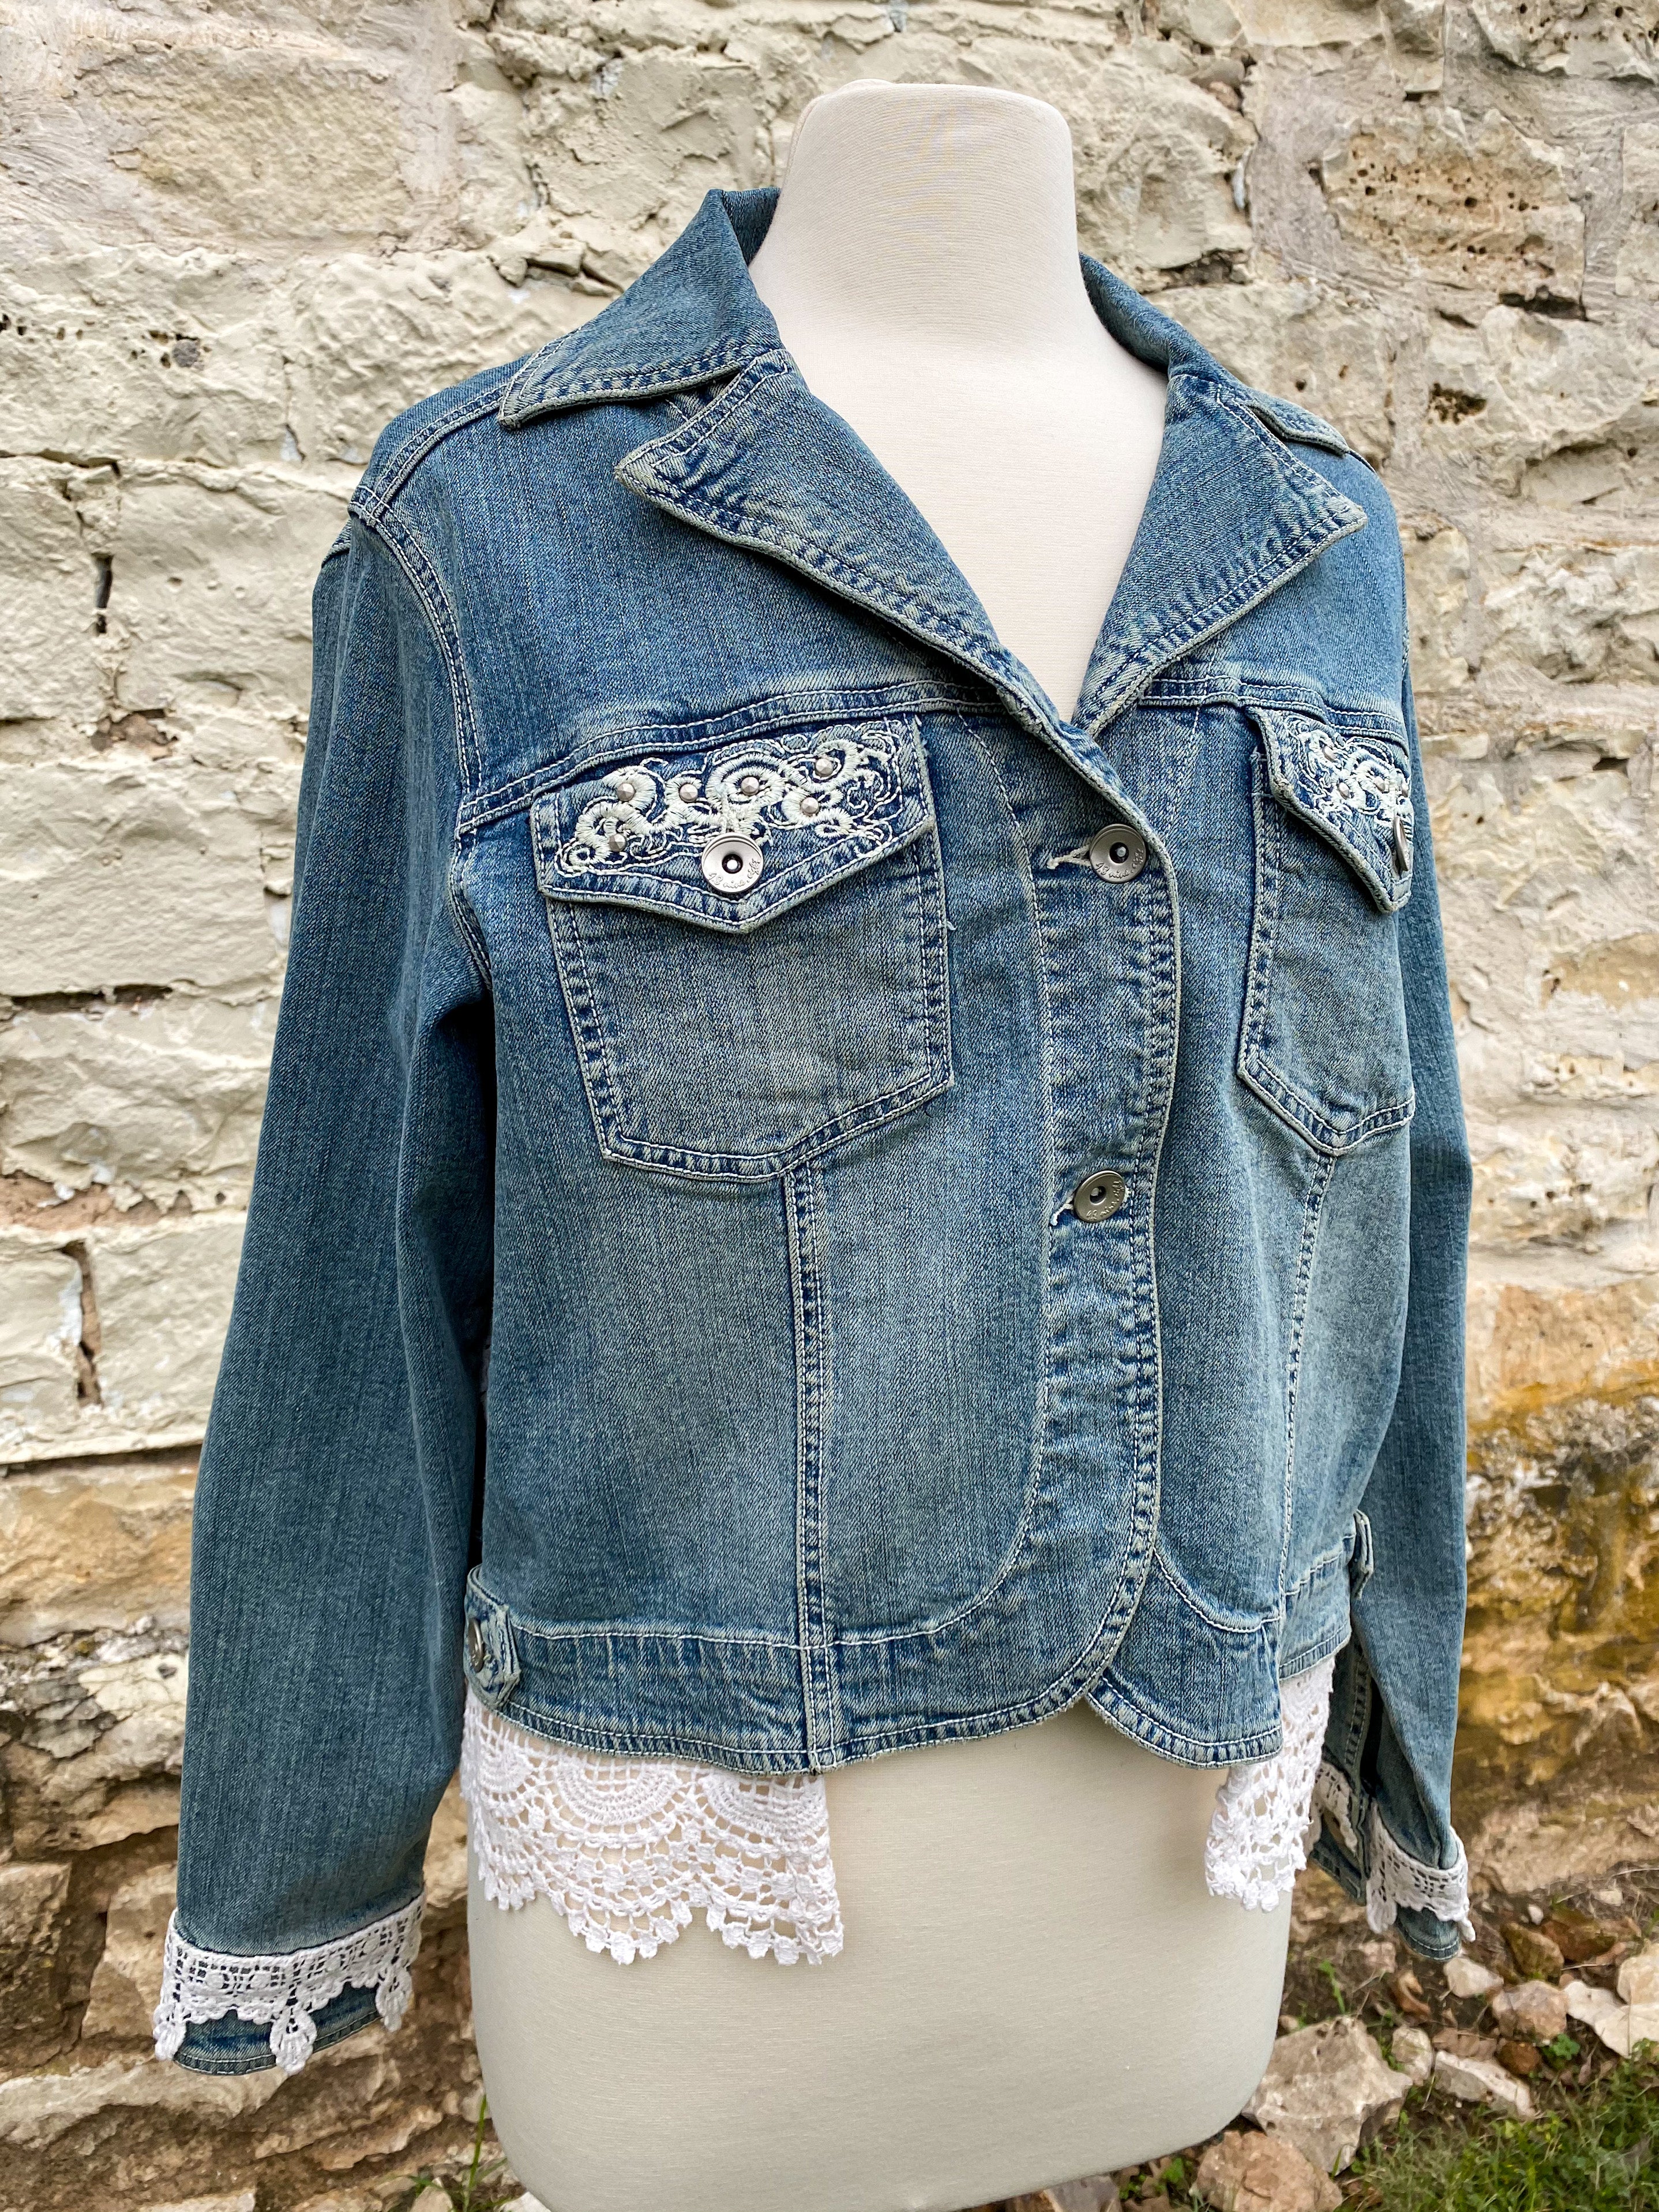 Women Floral Lace Denim Jacket Coat Embroidery Loose Ripped Tops Outerwear  | eBay